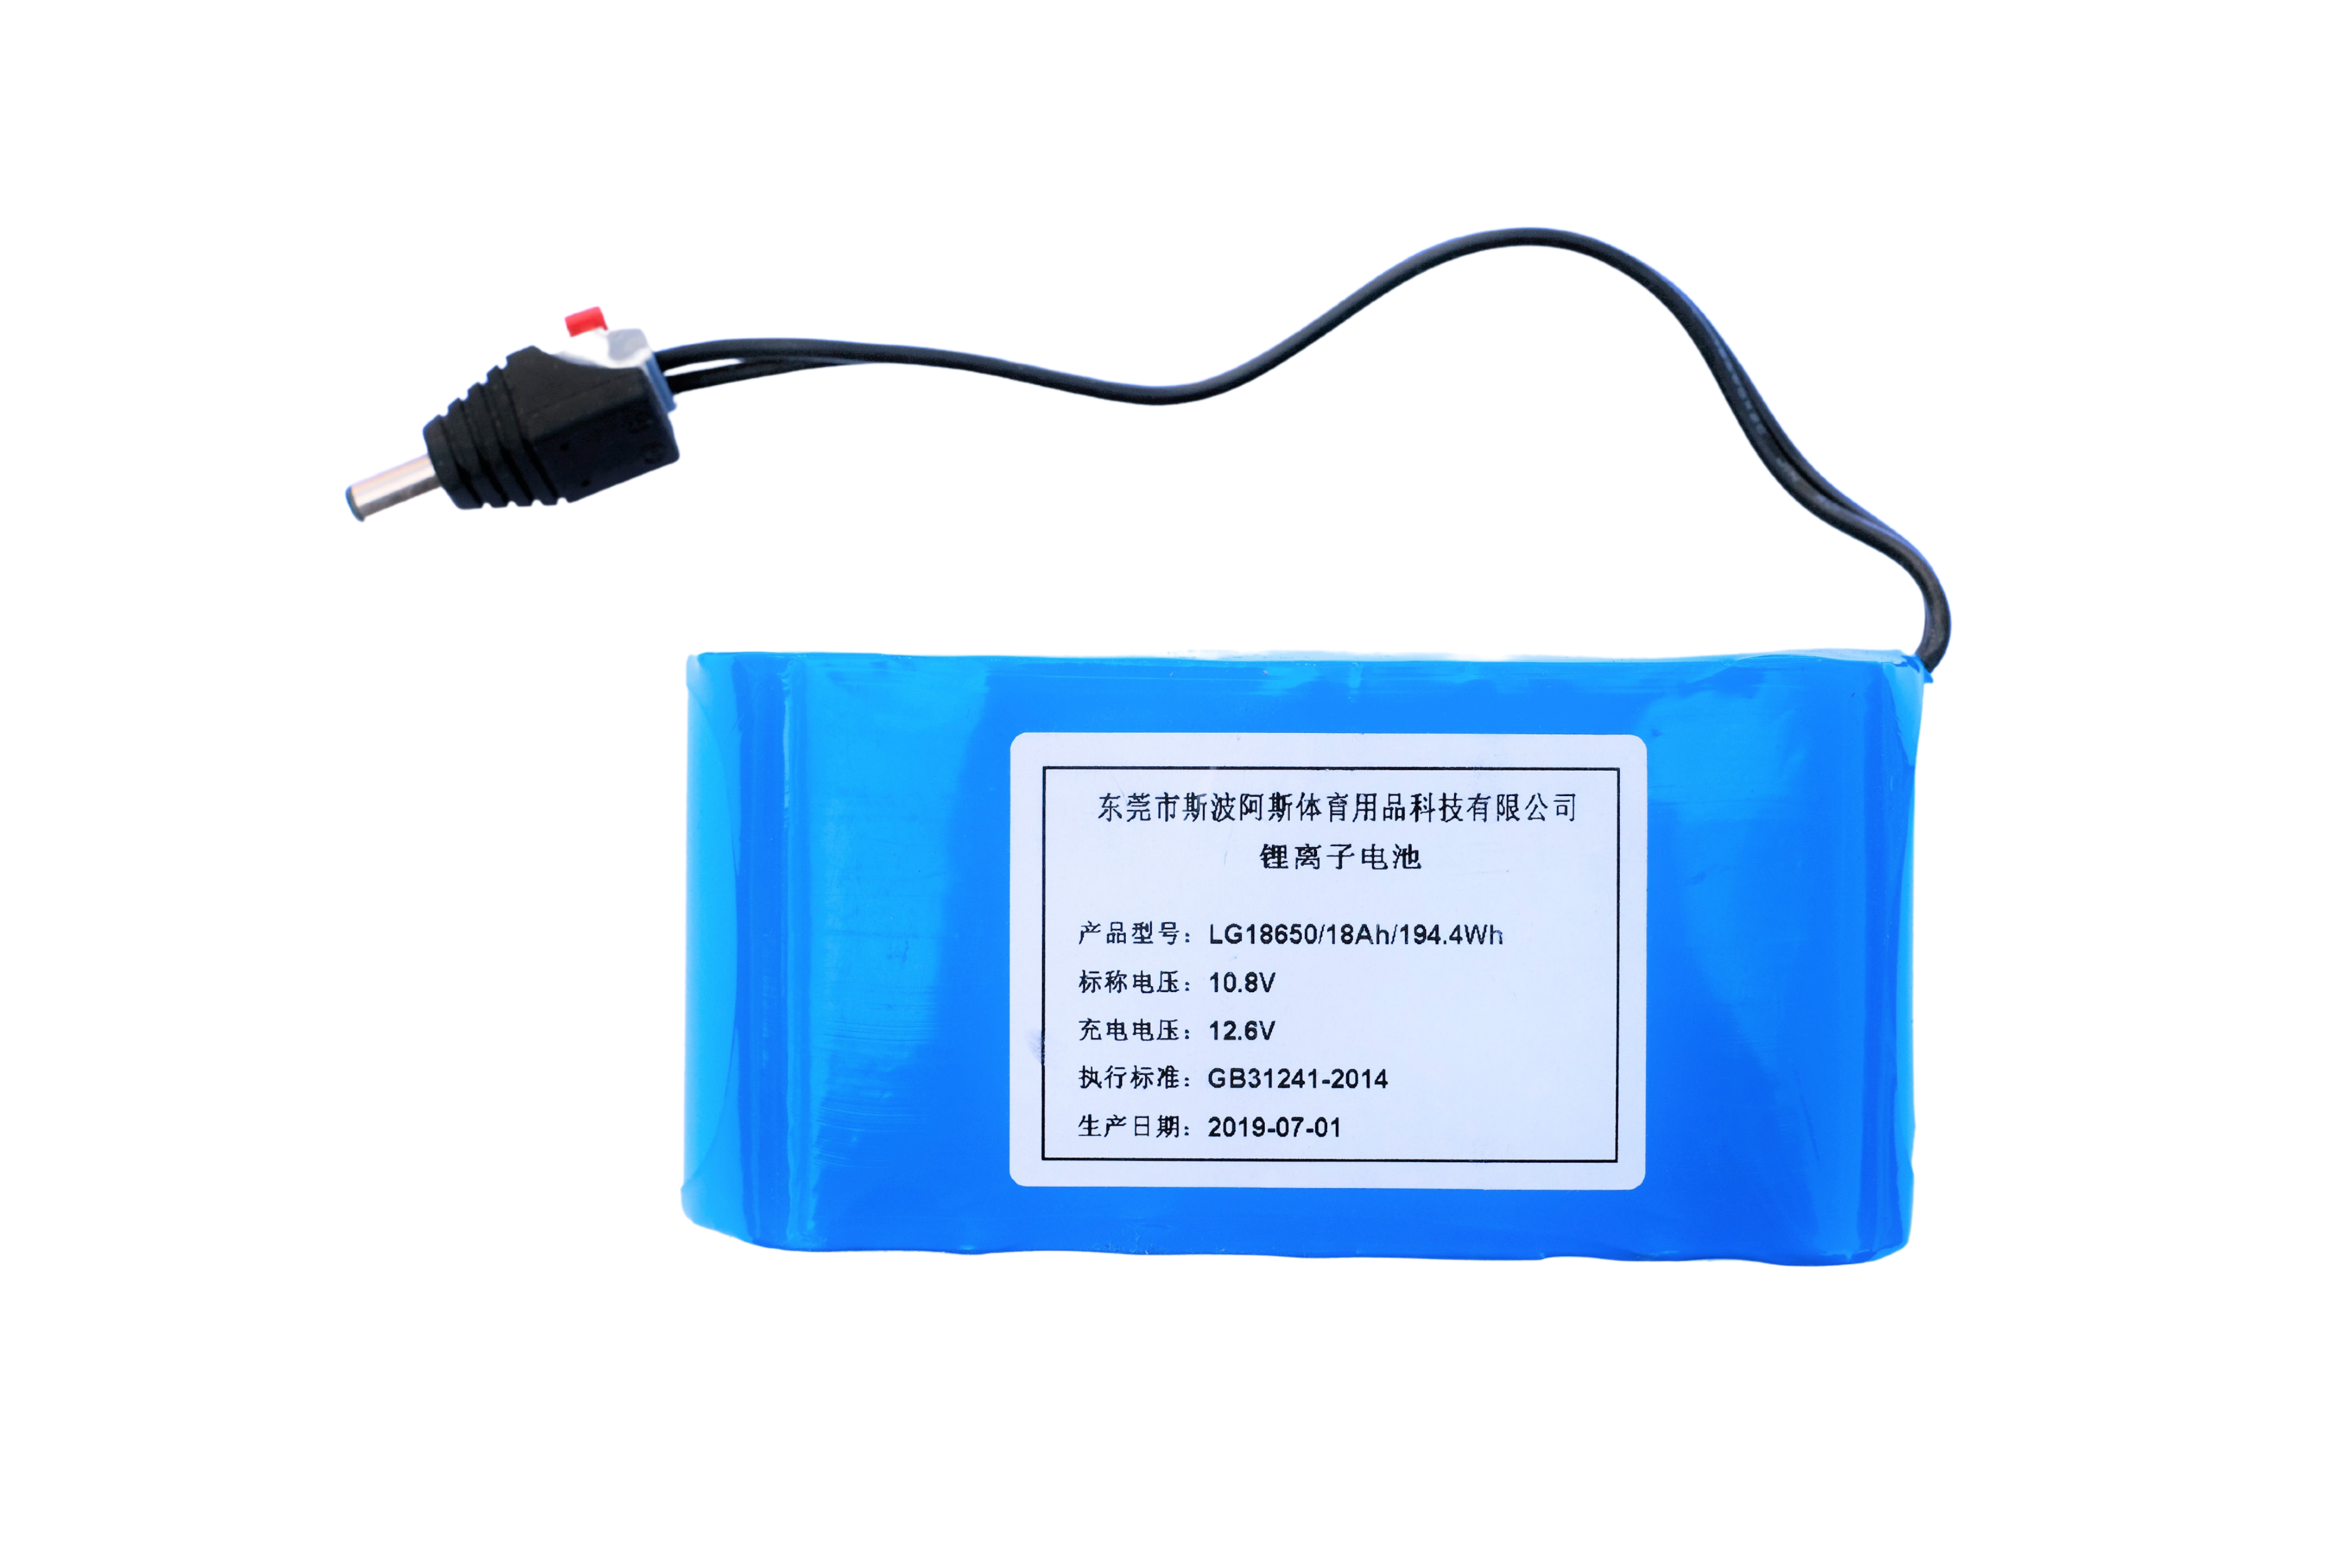 Ballmachine Accessories: Lithium Battery (12,6V/18Ah/ 194,4 W/h) suitable for MSV DirectShot, MSV PlayCoach and Tutor ball machines